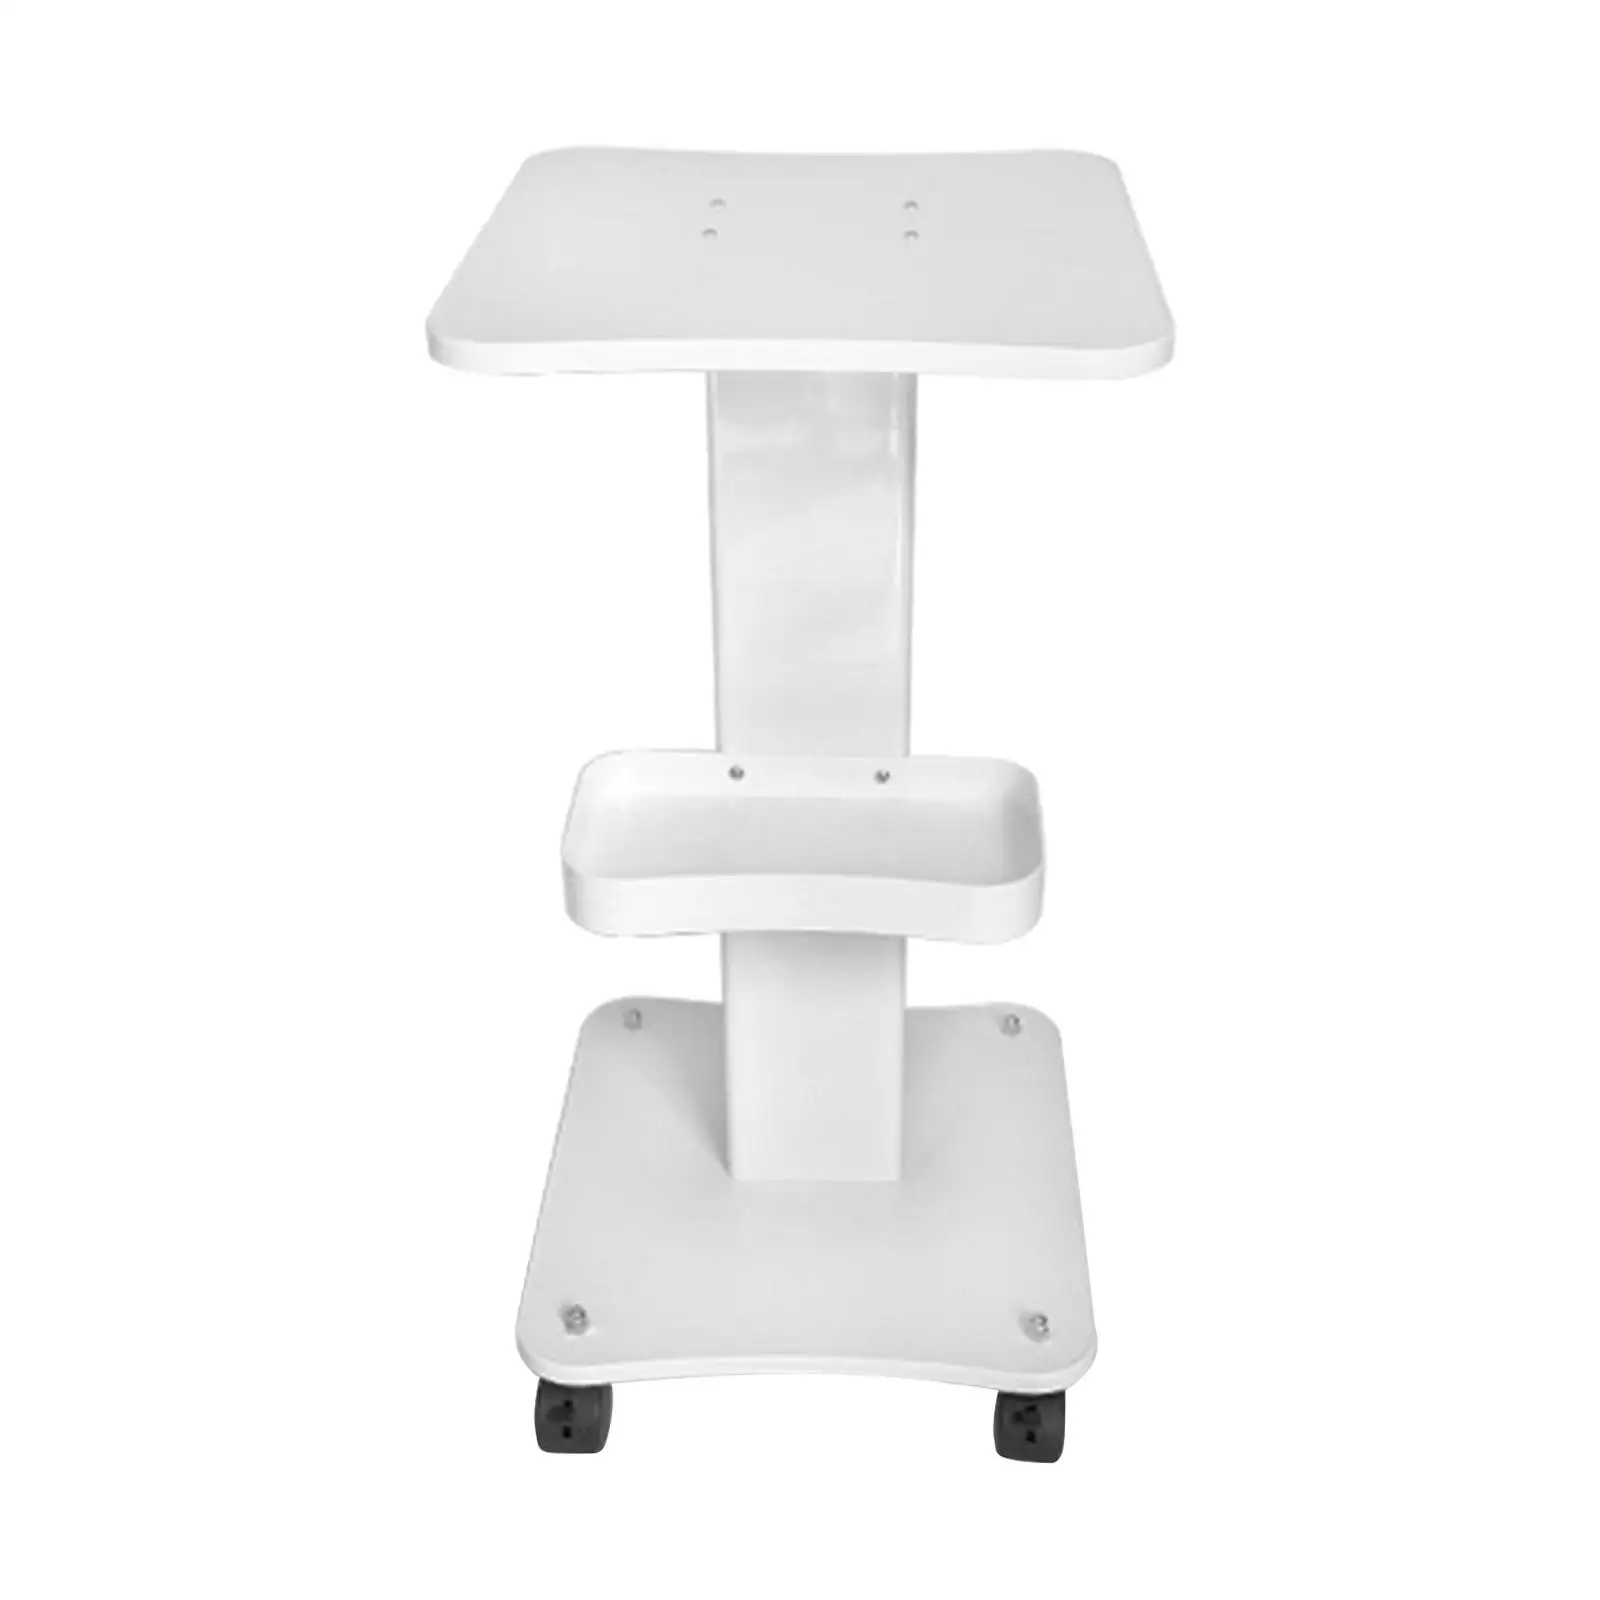 Beauty-Instruments-Cart-Salon-Trolley-Portable-Space-Saving-Table-Work-Stations-3-Tier-Beauty-Rolling-Cart-5